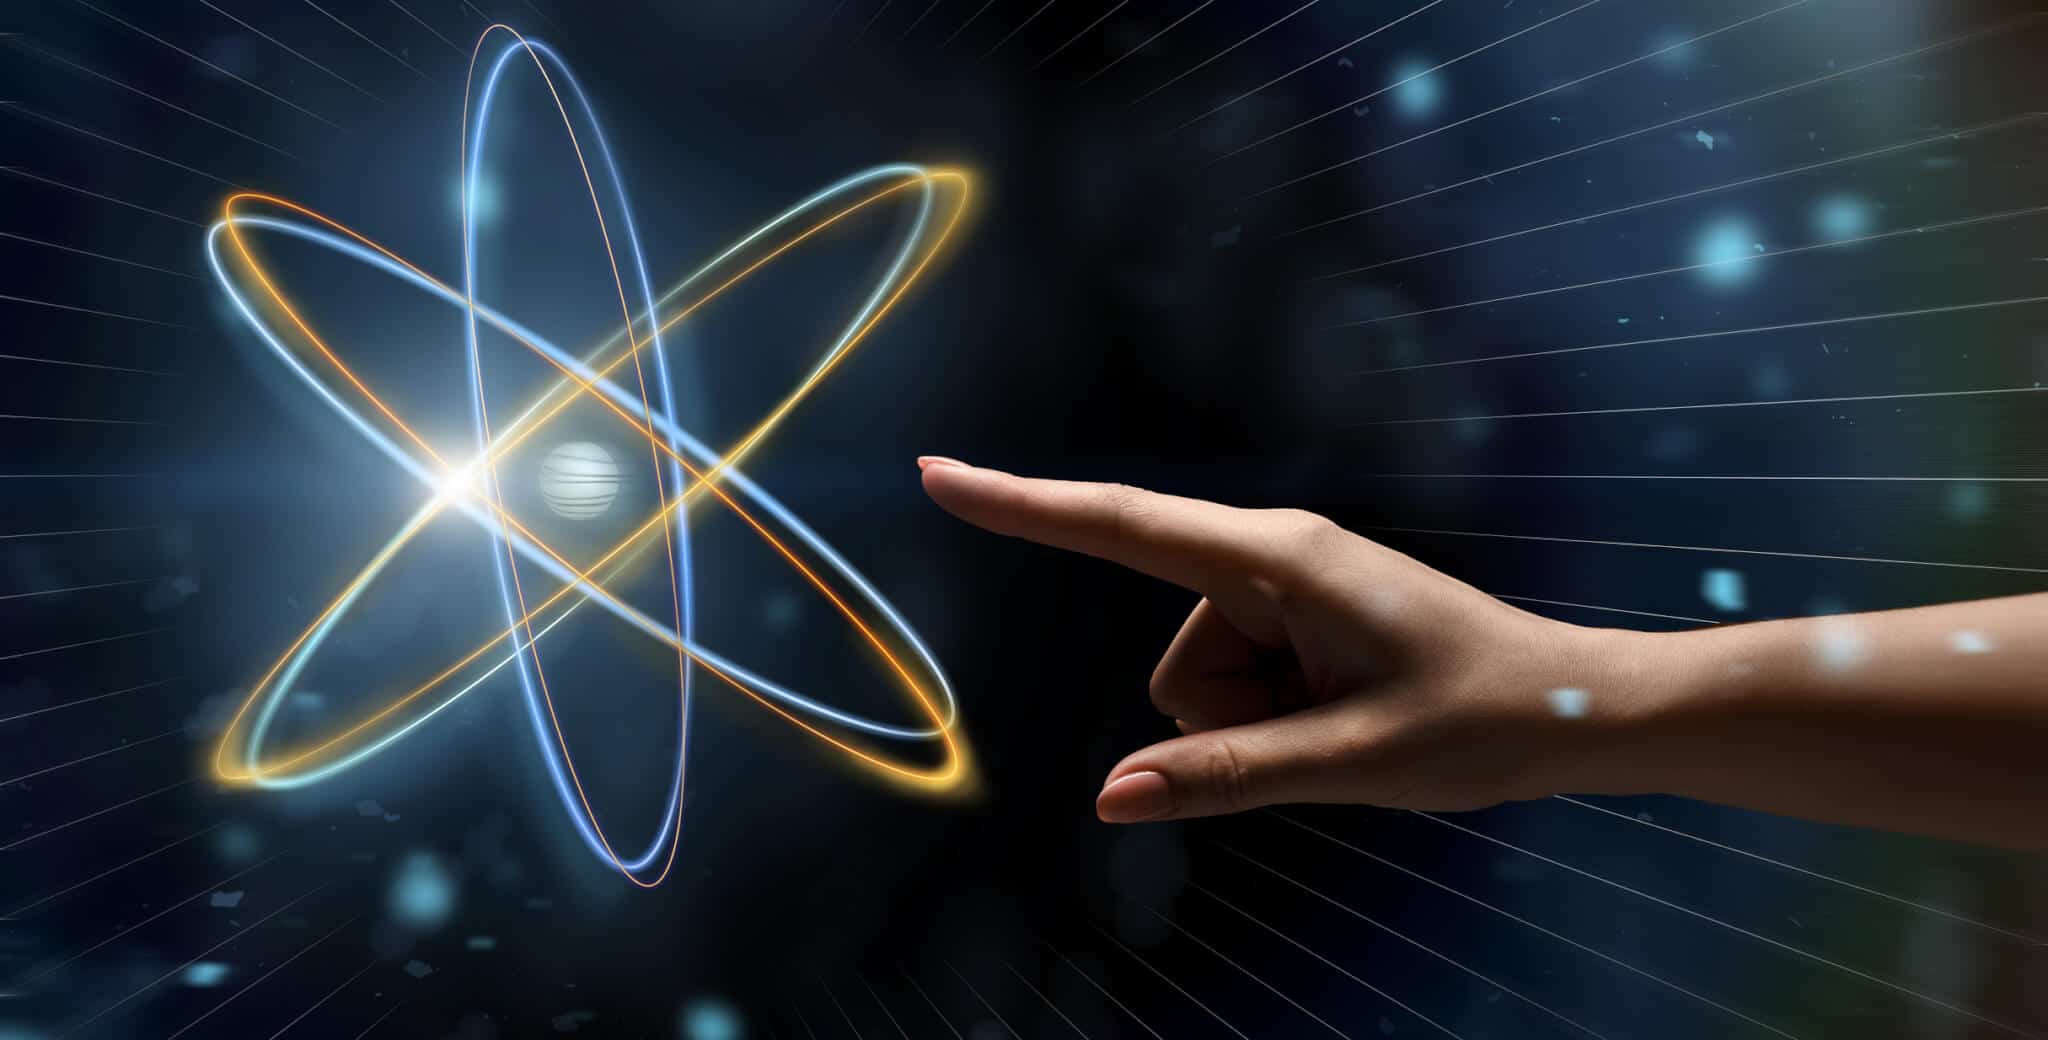 A finger reaches to touch a spinning atom